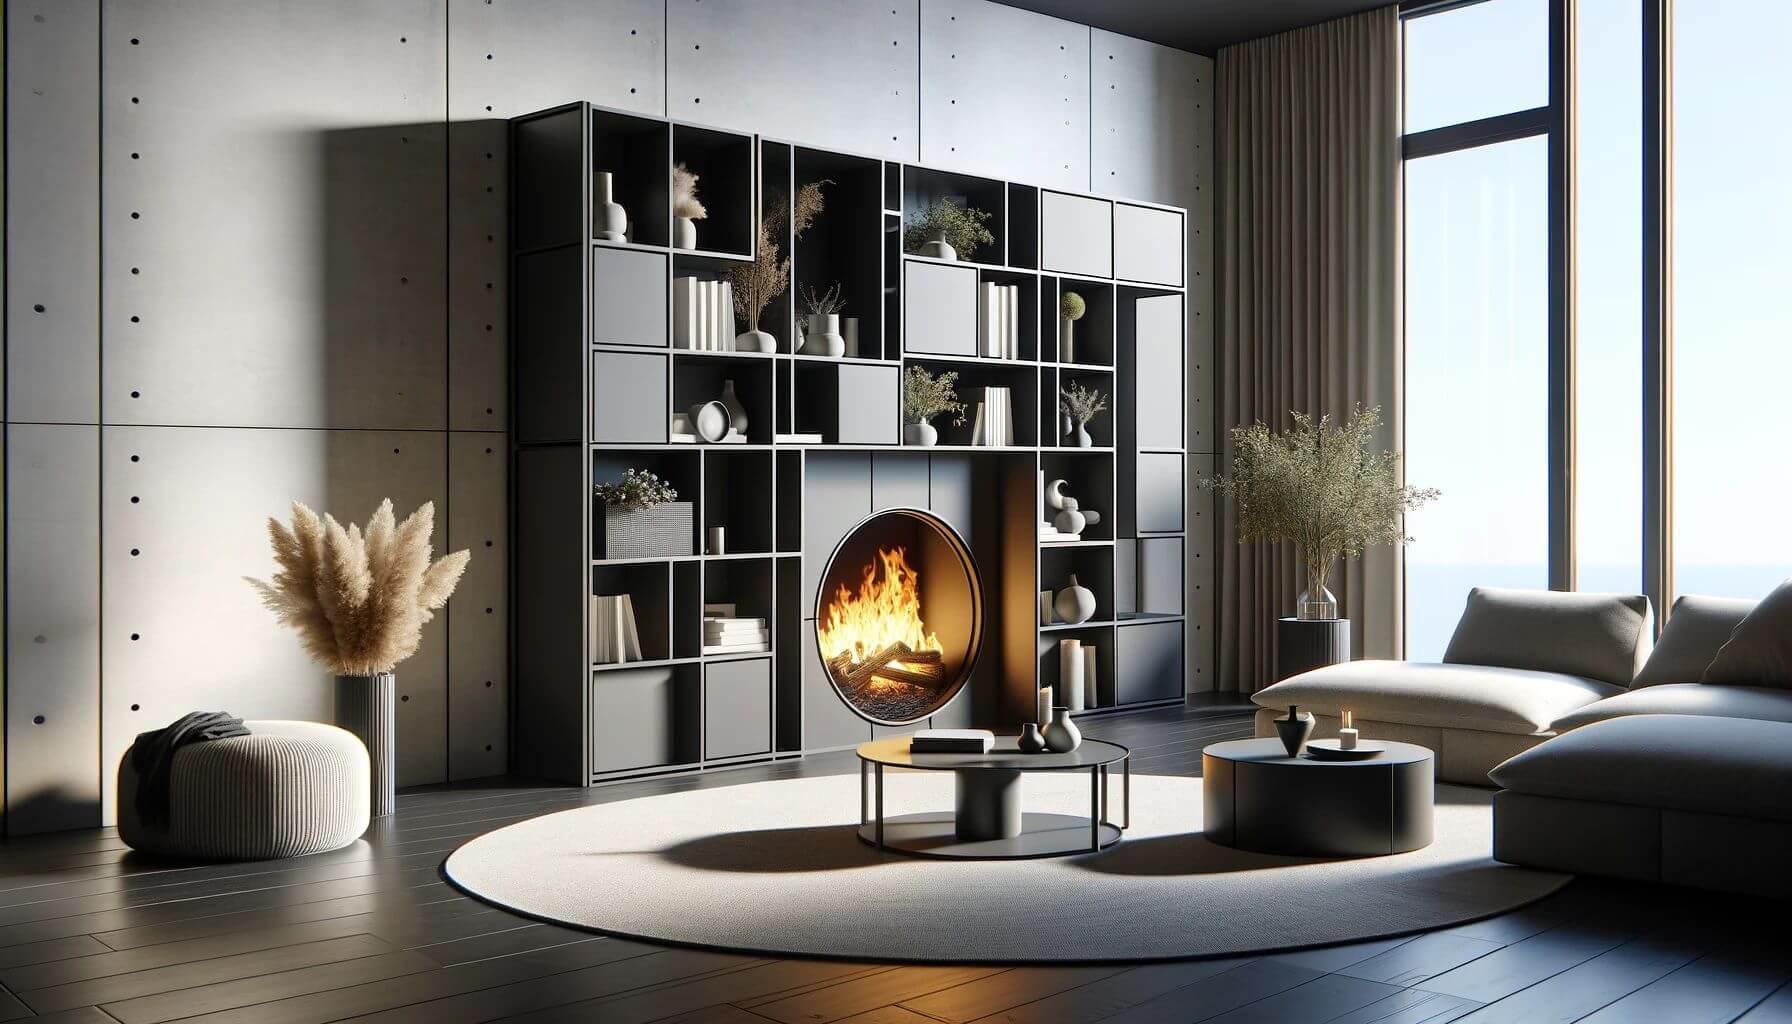 How To Select A Fireplace based on Living Room Design